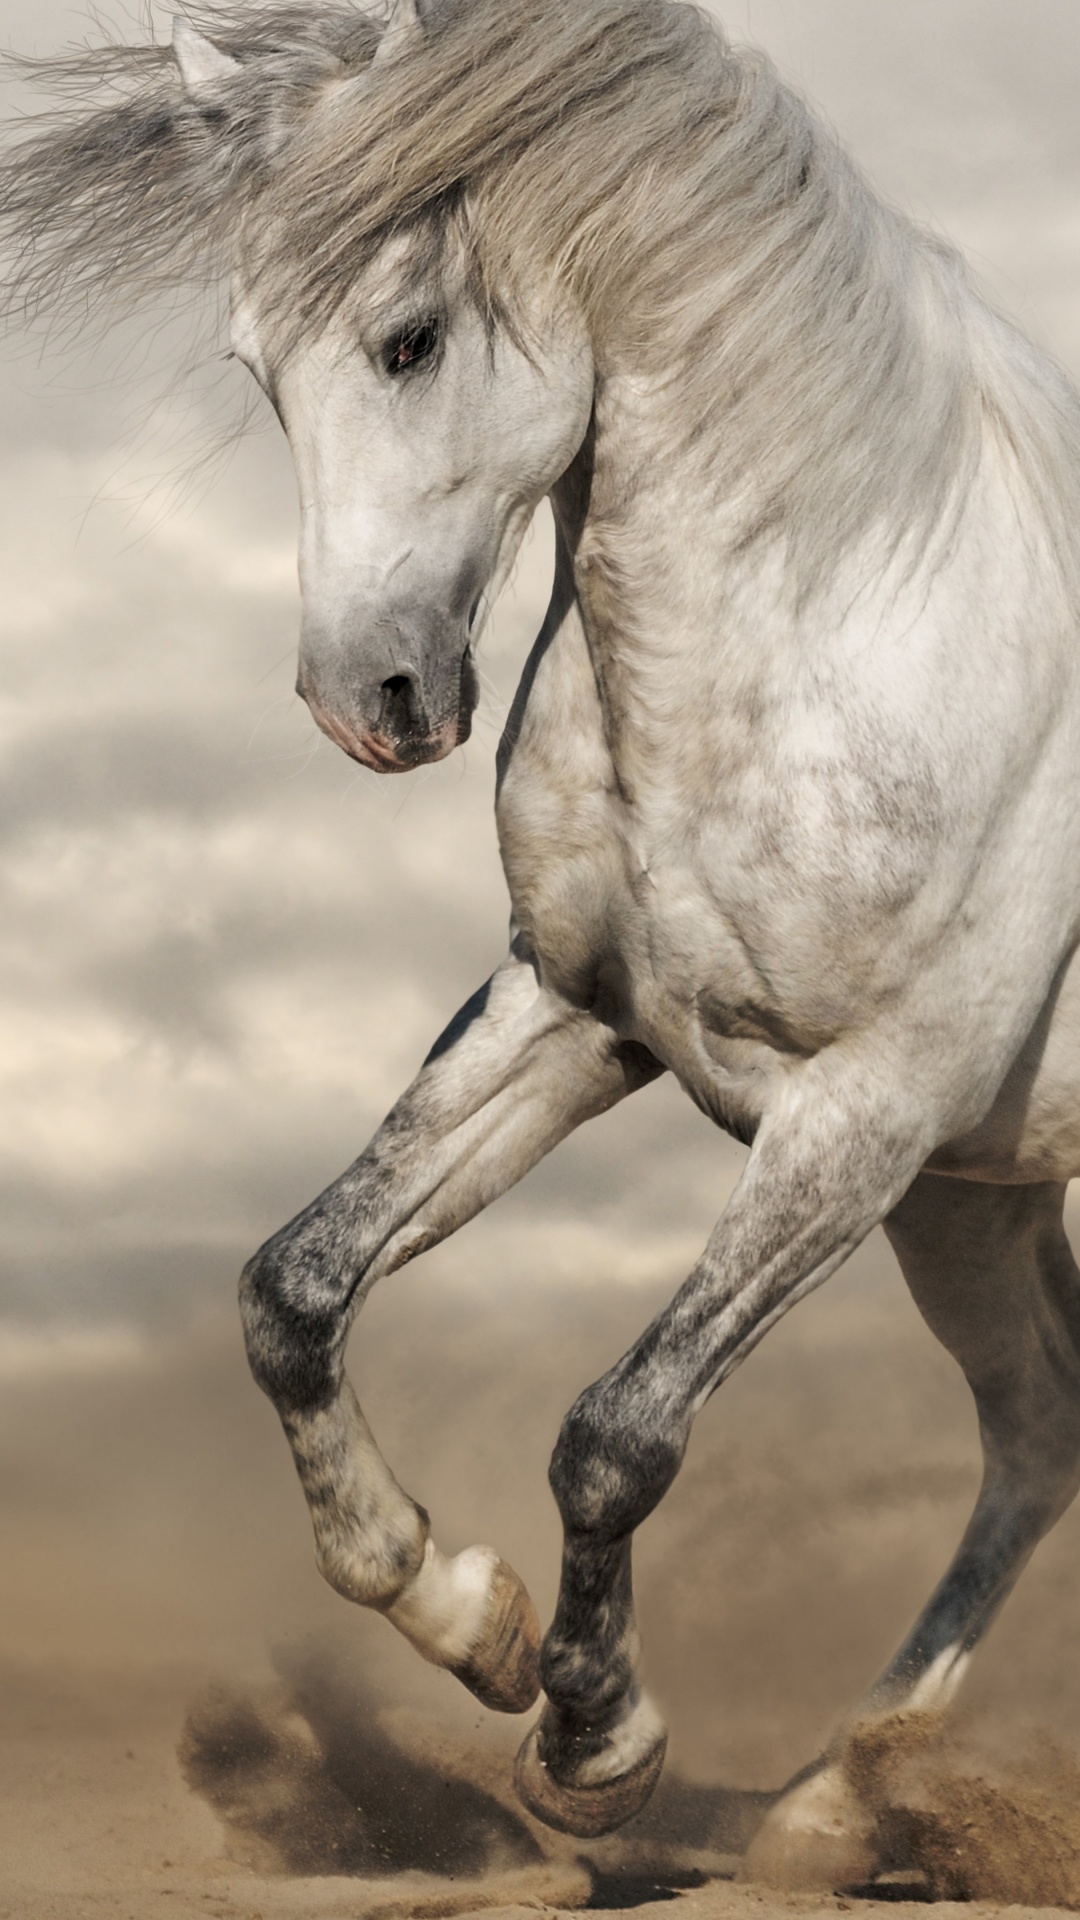 White Horse Running on Brown Sand During Daytime. Wallpaper in 1080x1920 Resolution